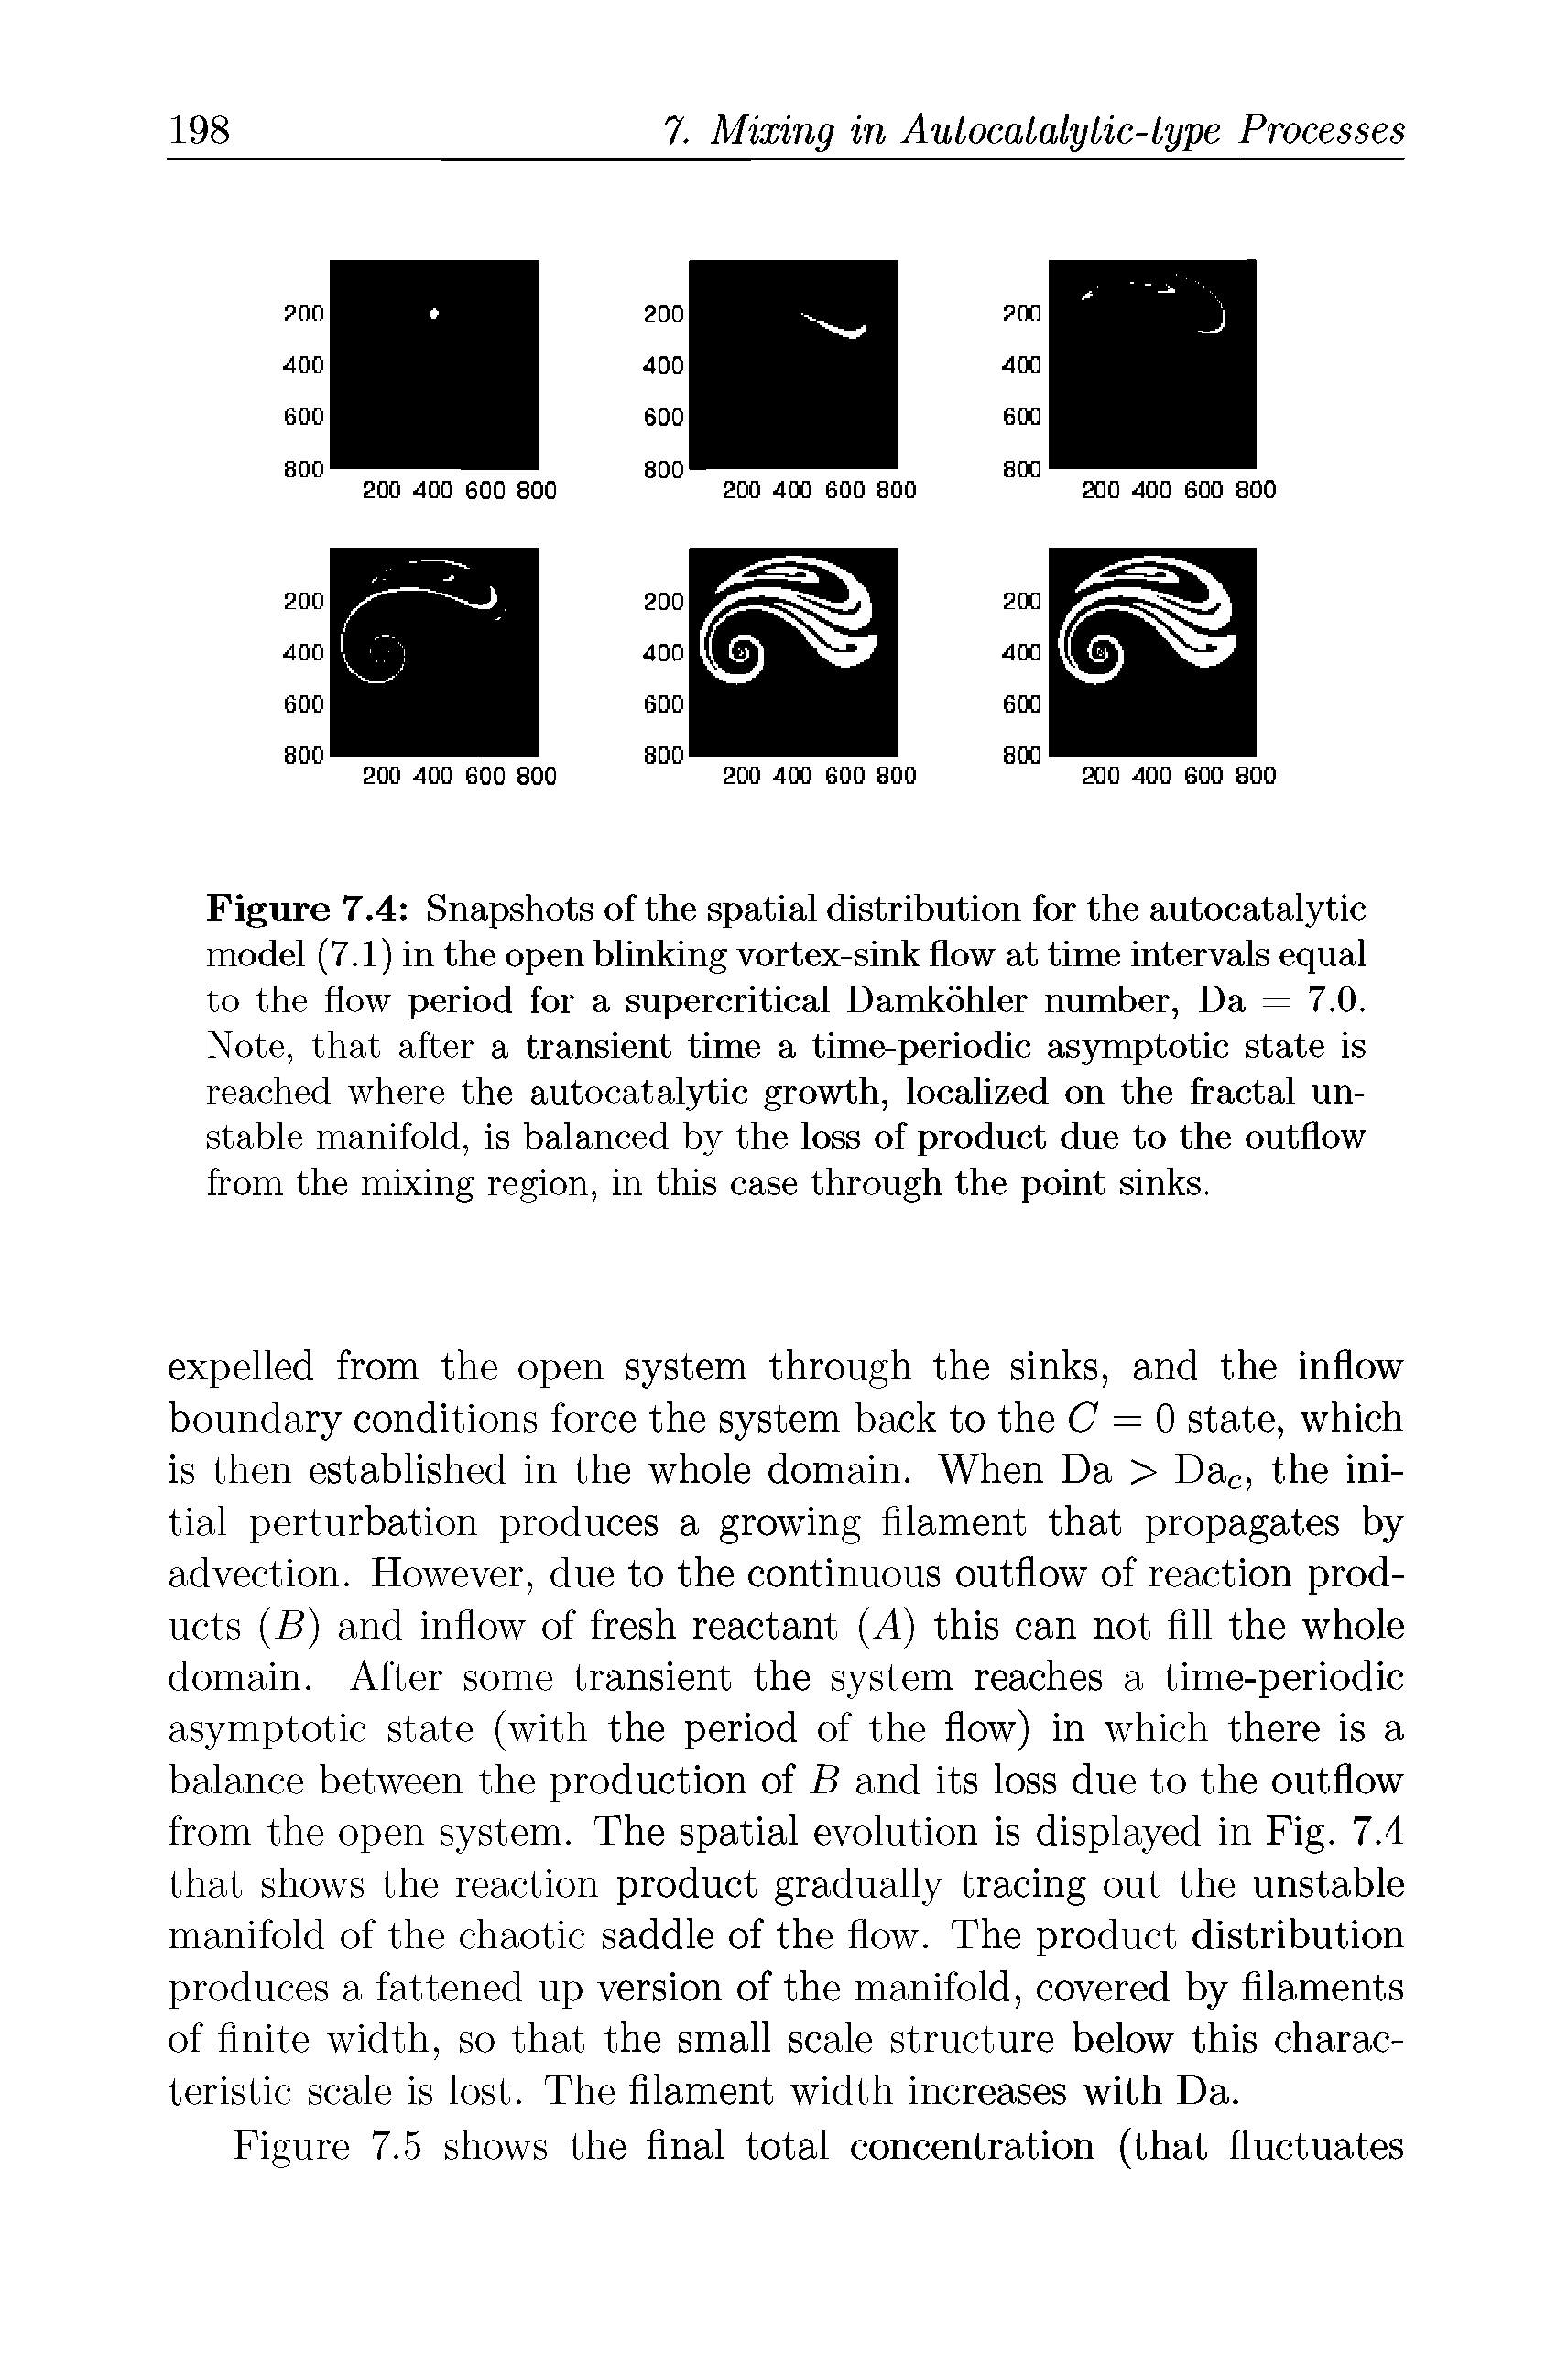 Figure 7.4 Snapshots of the spatial distribution for the autocatalytic model (7.1) in the open blinking vortex-sink flow at time intervals equal to the flow period for a supercritical Damkohler number, Da = 7.0. Note, that after a transient time a time-periodic asymptotic state is reached where the autocatalytic growth, localized on the fractal unstable manifold, is balanced by the loss of product due to the outflow from the mixing region, in this case through the point sinks.